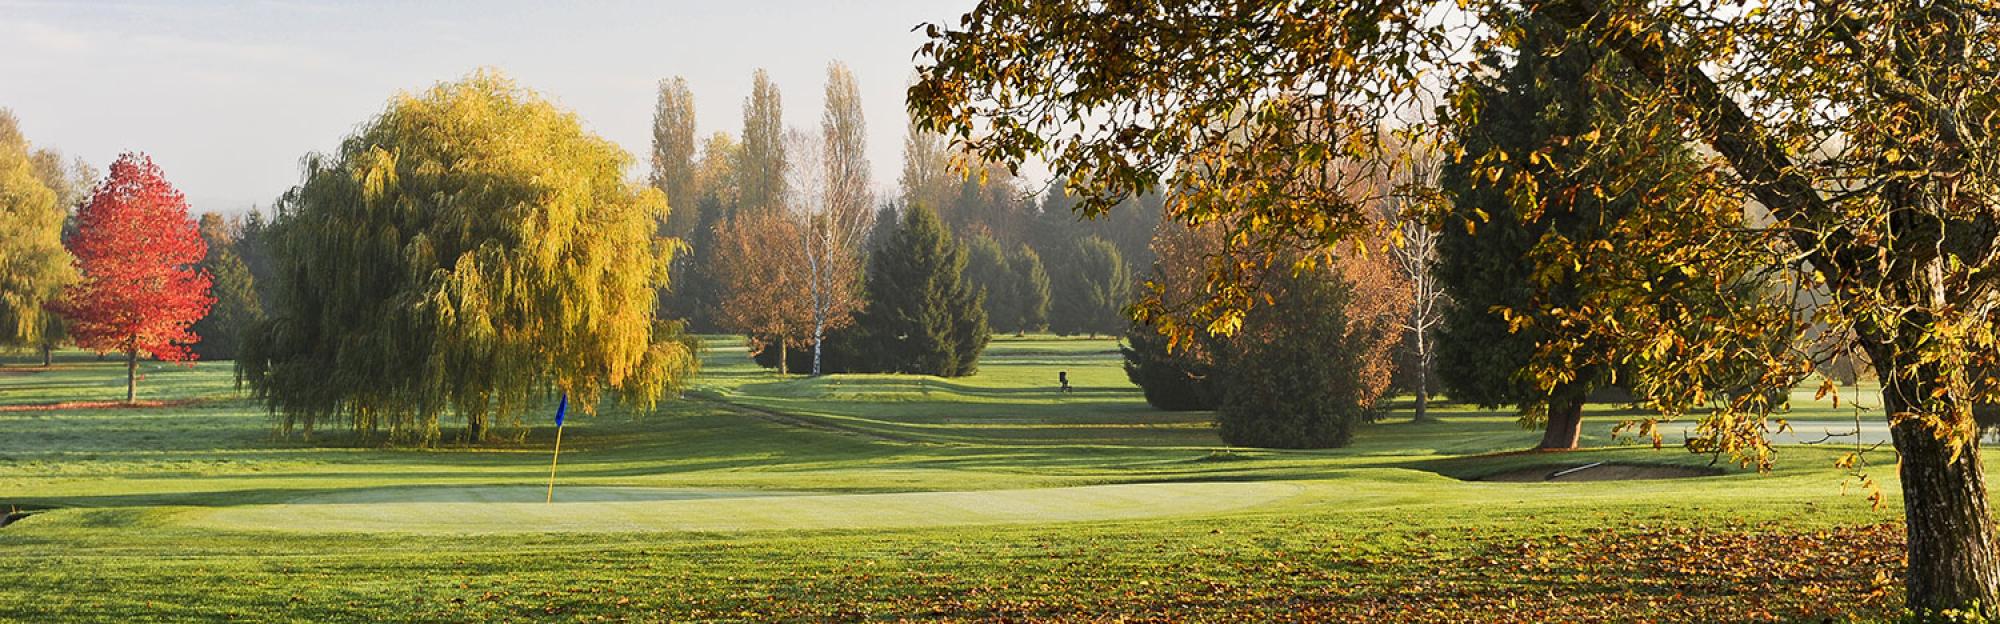 Crecy Golf Club includes among the leading golf course near Paris